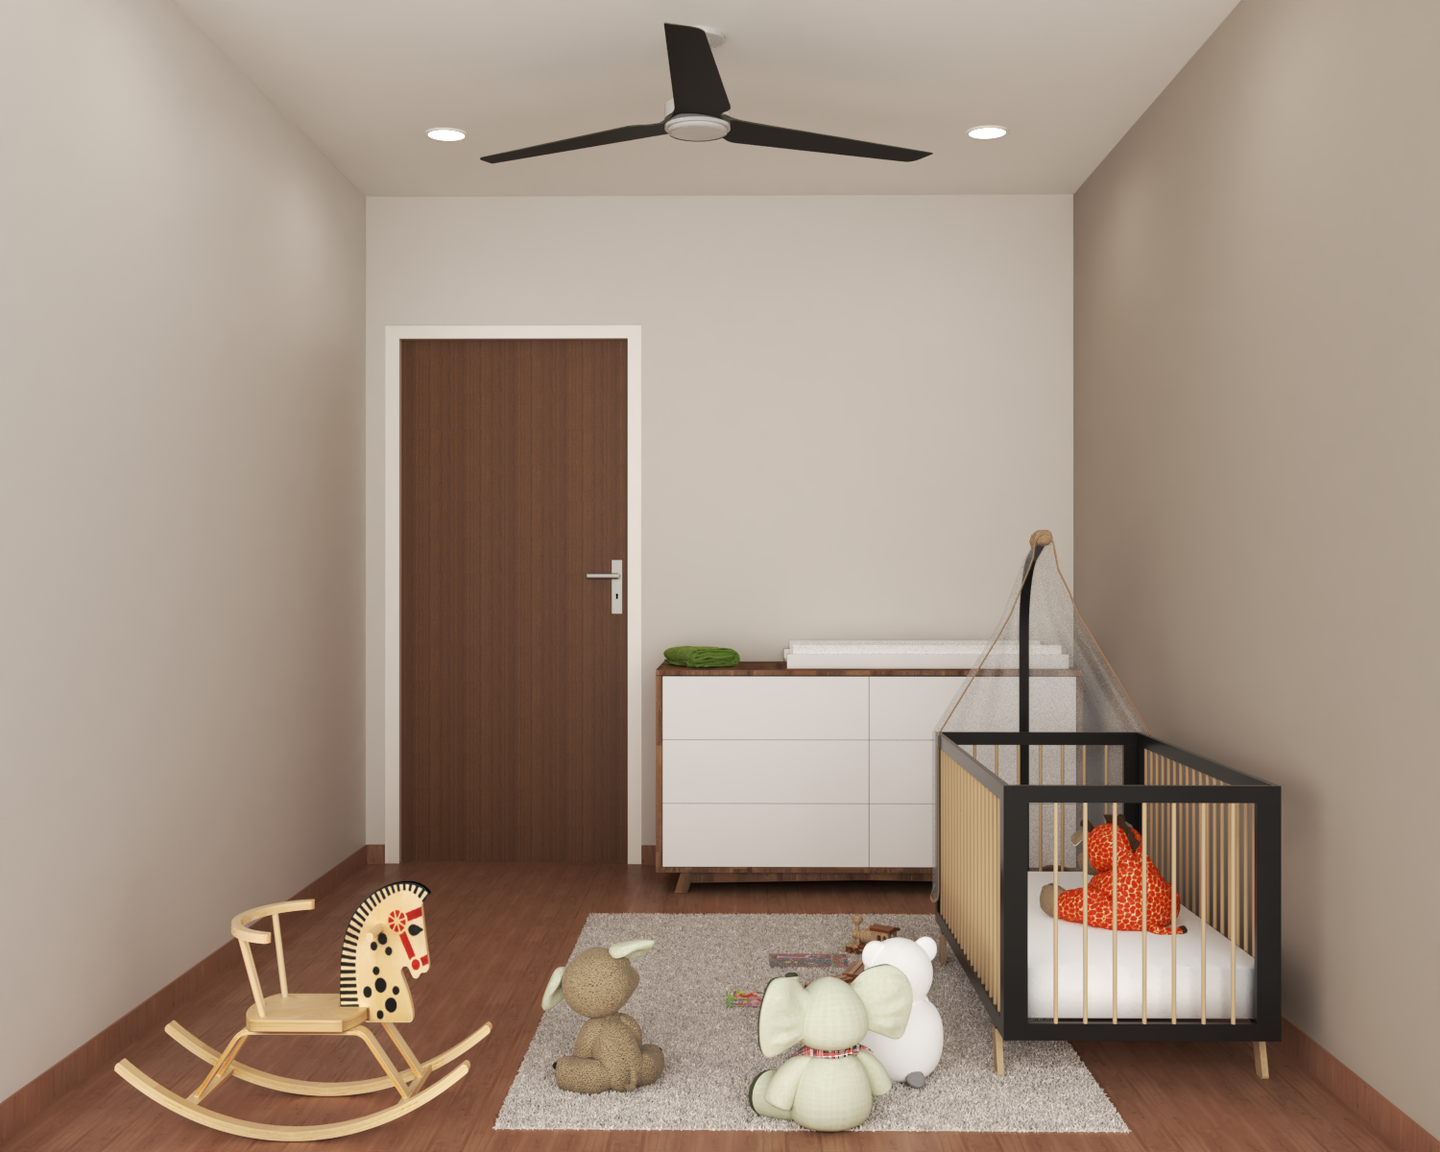 Compact Kids Bedroom with Ample Play Space - Livspace